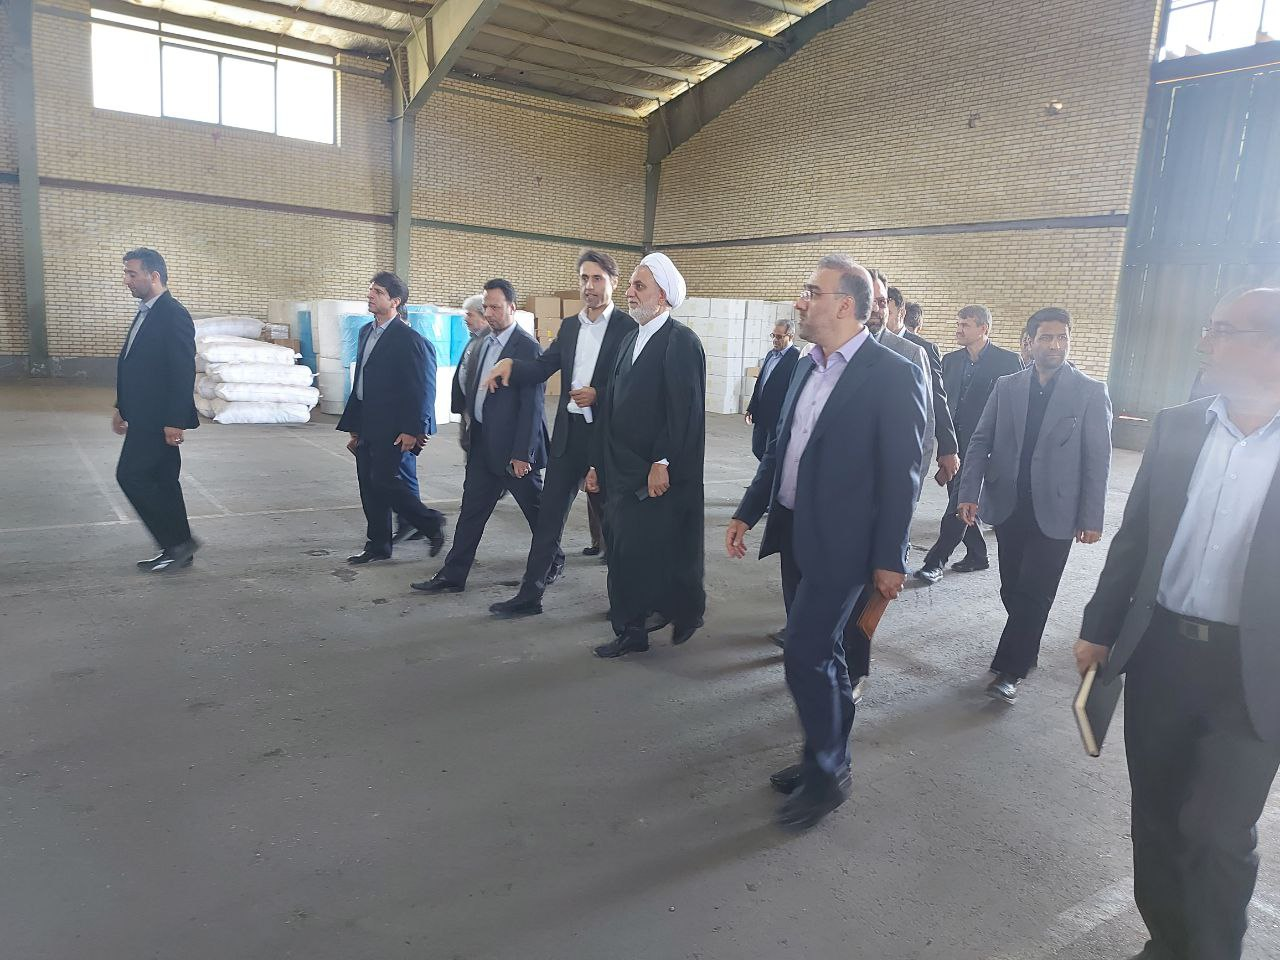 The visit of the head of justice of Kerman province to the region